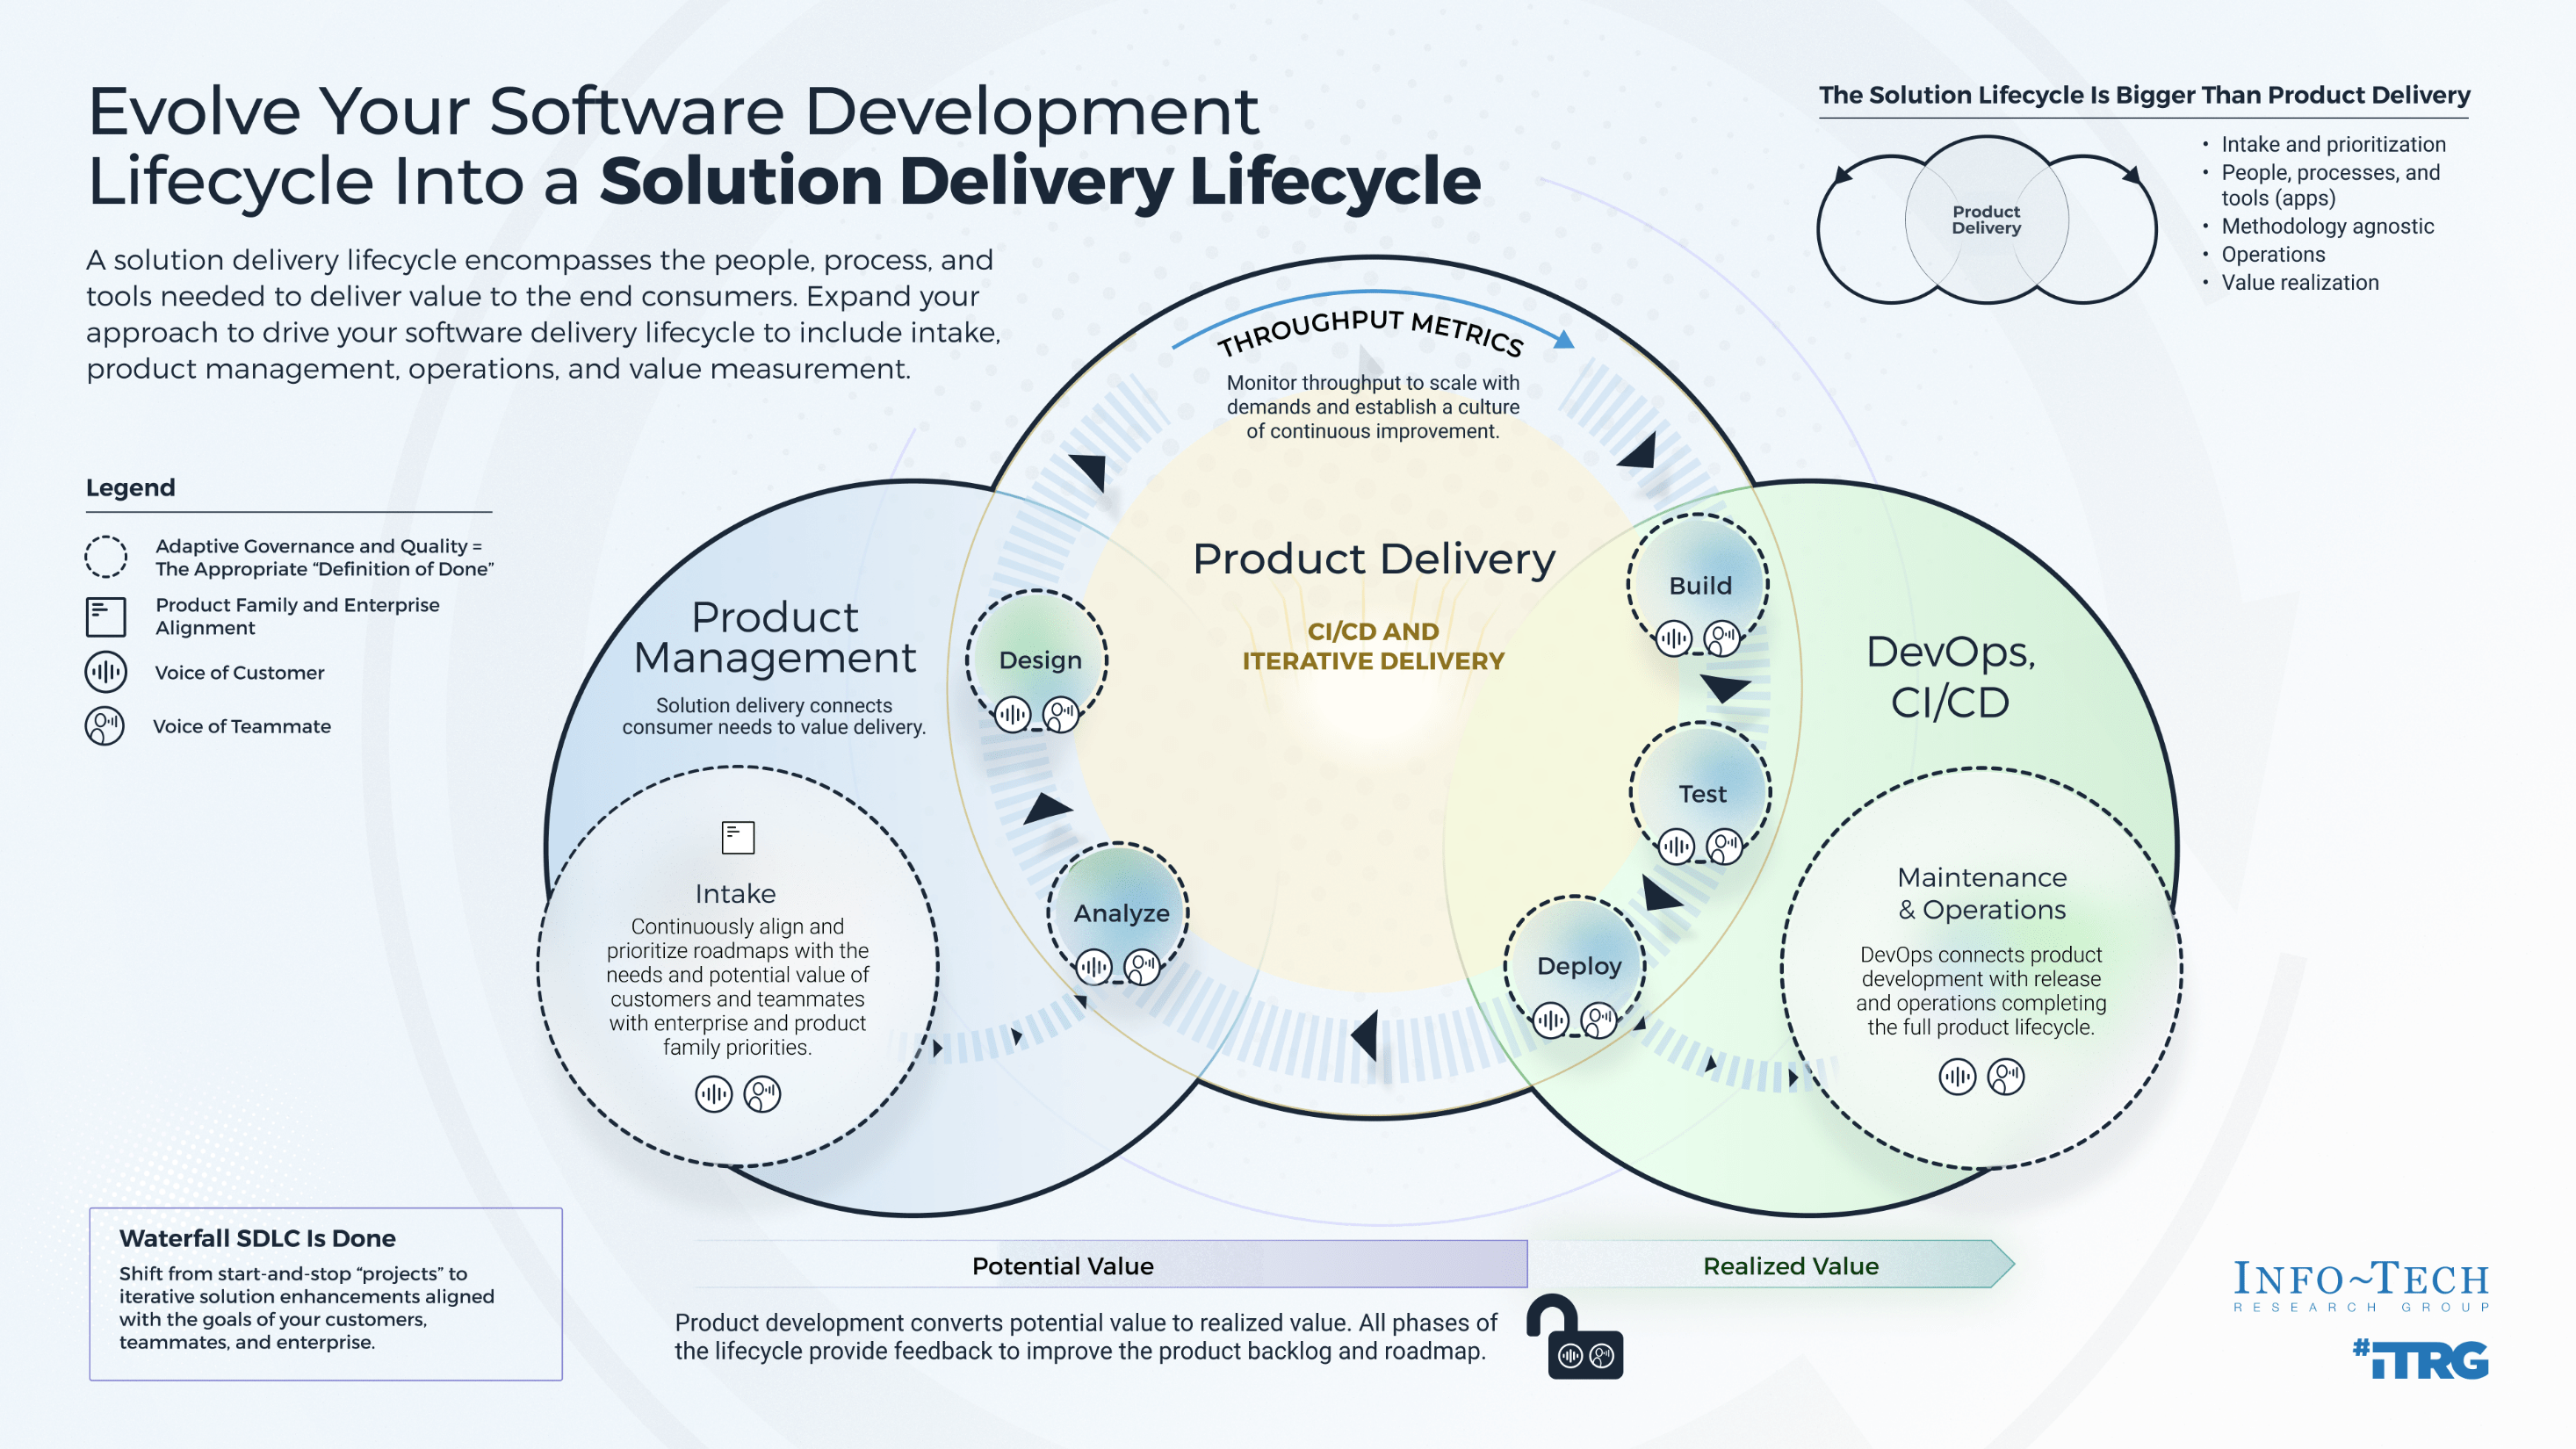 Infographic titled 'Evolve Your Software Development Lifecycle Into a Solution Delivery Lifecycle'. It includes the Solution DLC. The main circle in the center is 'Product Delivery' with the four cycle steps 'Analyze', 'Design', 'Build', and 'Deploy' incl. an extra 'Test'. To the left is 'Product Management' with Intake, and to the right is 'DevOps. Ci/CD' with the output 'Maintenance & Operations'. The first two circles fall under 'Potential Value' and the final one is 'Realized Value'. There is a legend defining different icons and line-types. There are various other notes in the corners of the infographic.